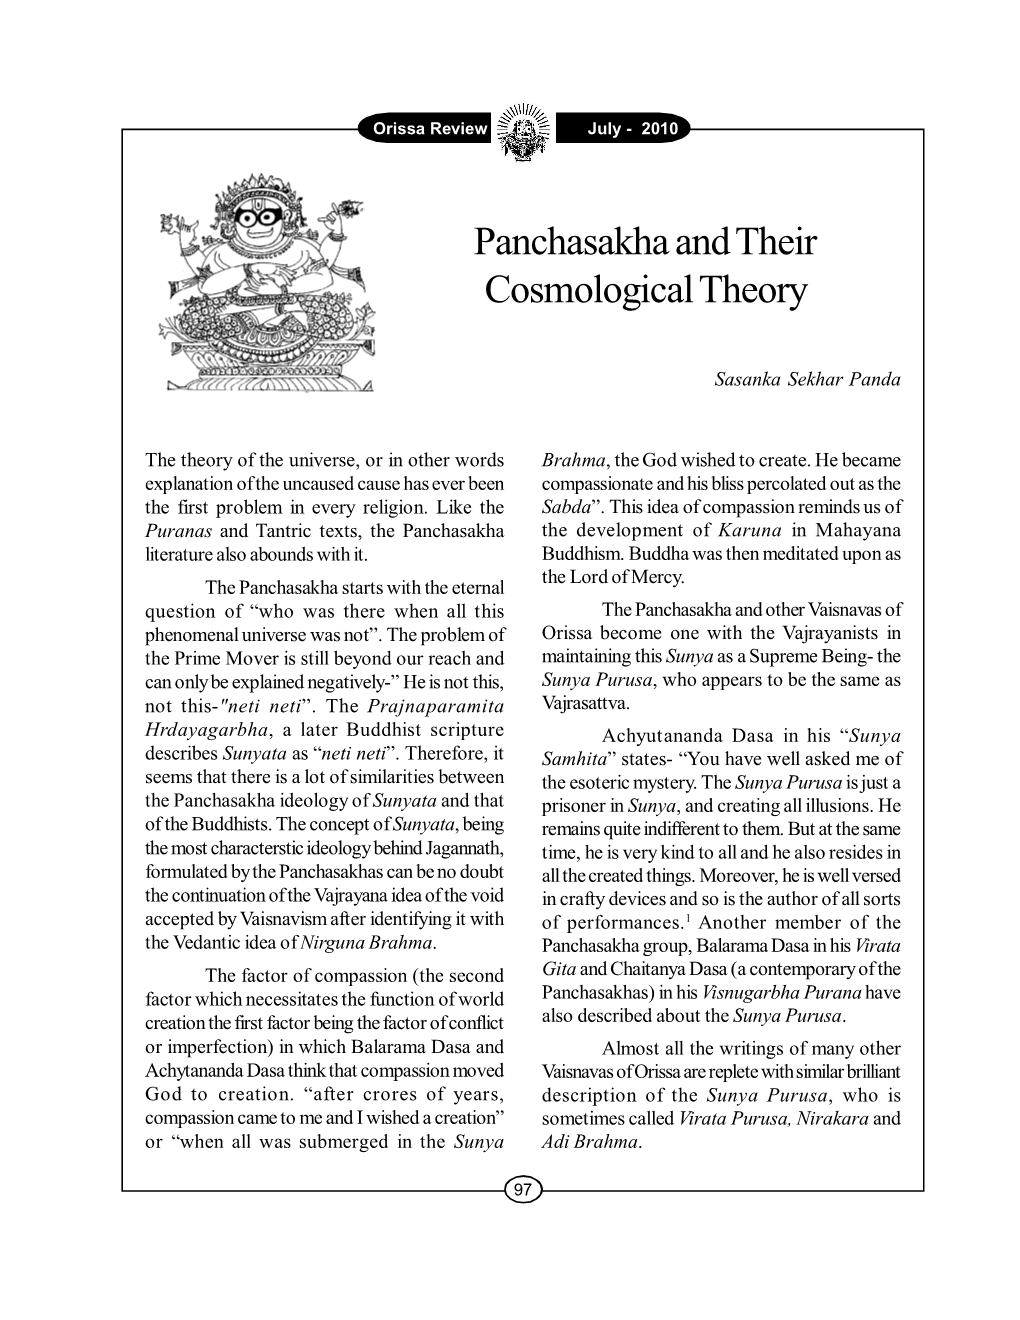 Panchasakha and Their Cosmological Theory